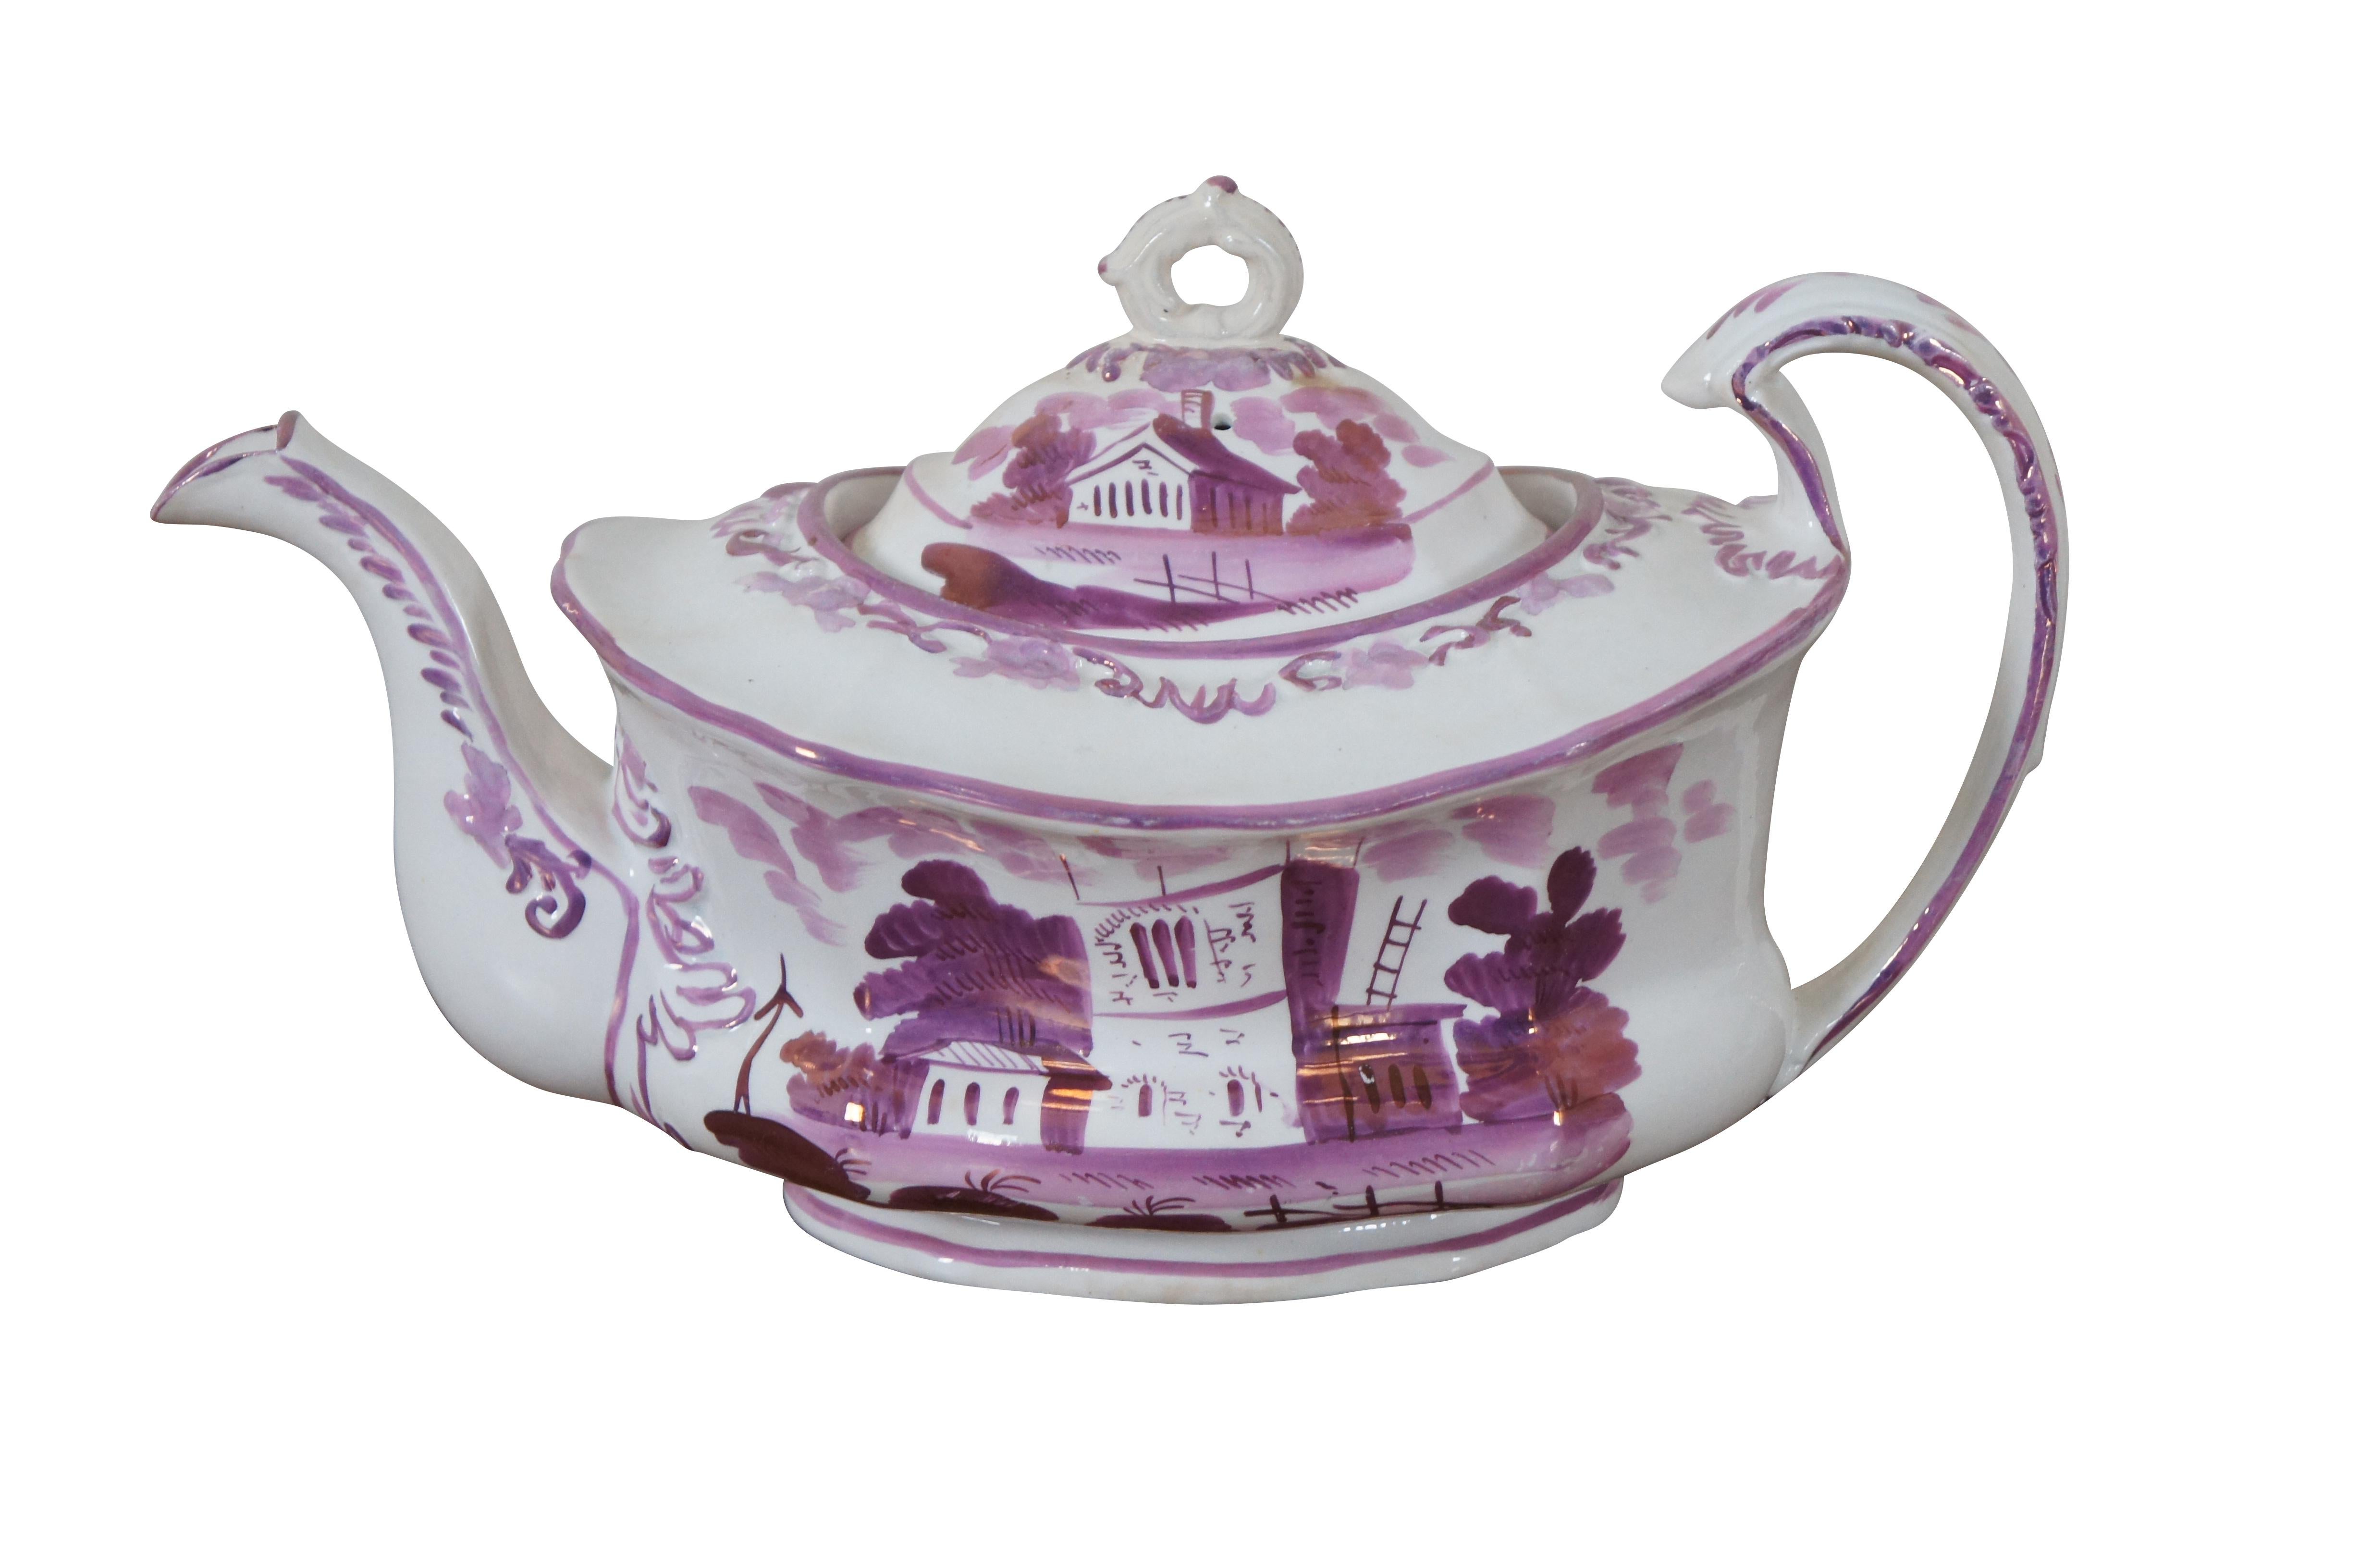 Antique 19th century lustreware tea set including teapot with lid, large sugar bowl with lid and cream pitcher, all beautifully hand decorated with landscapes and buildings in iridescent pink / purple.

Dimensions:
Tea Pot - 11.25” x 6” x 6.5” /